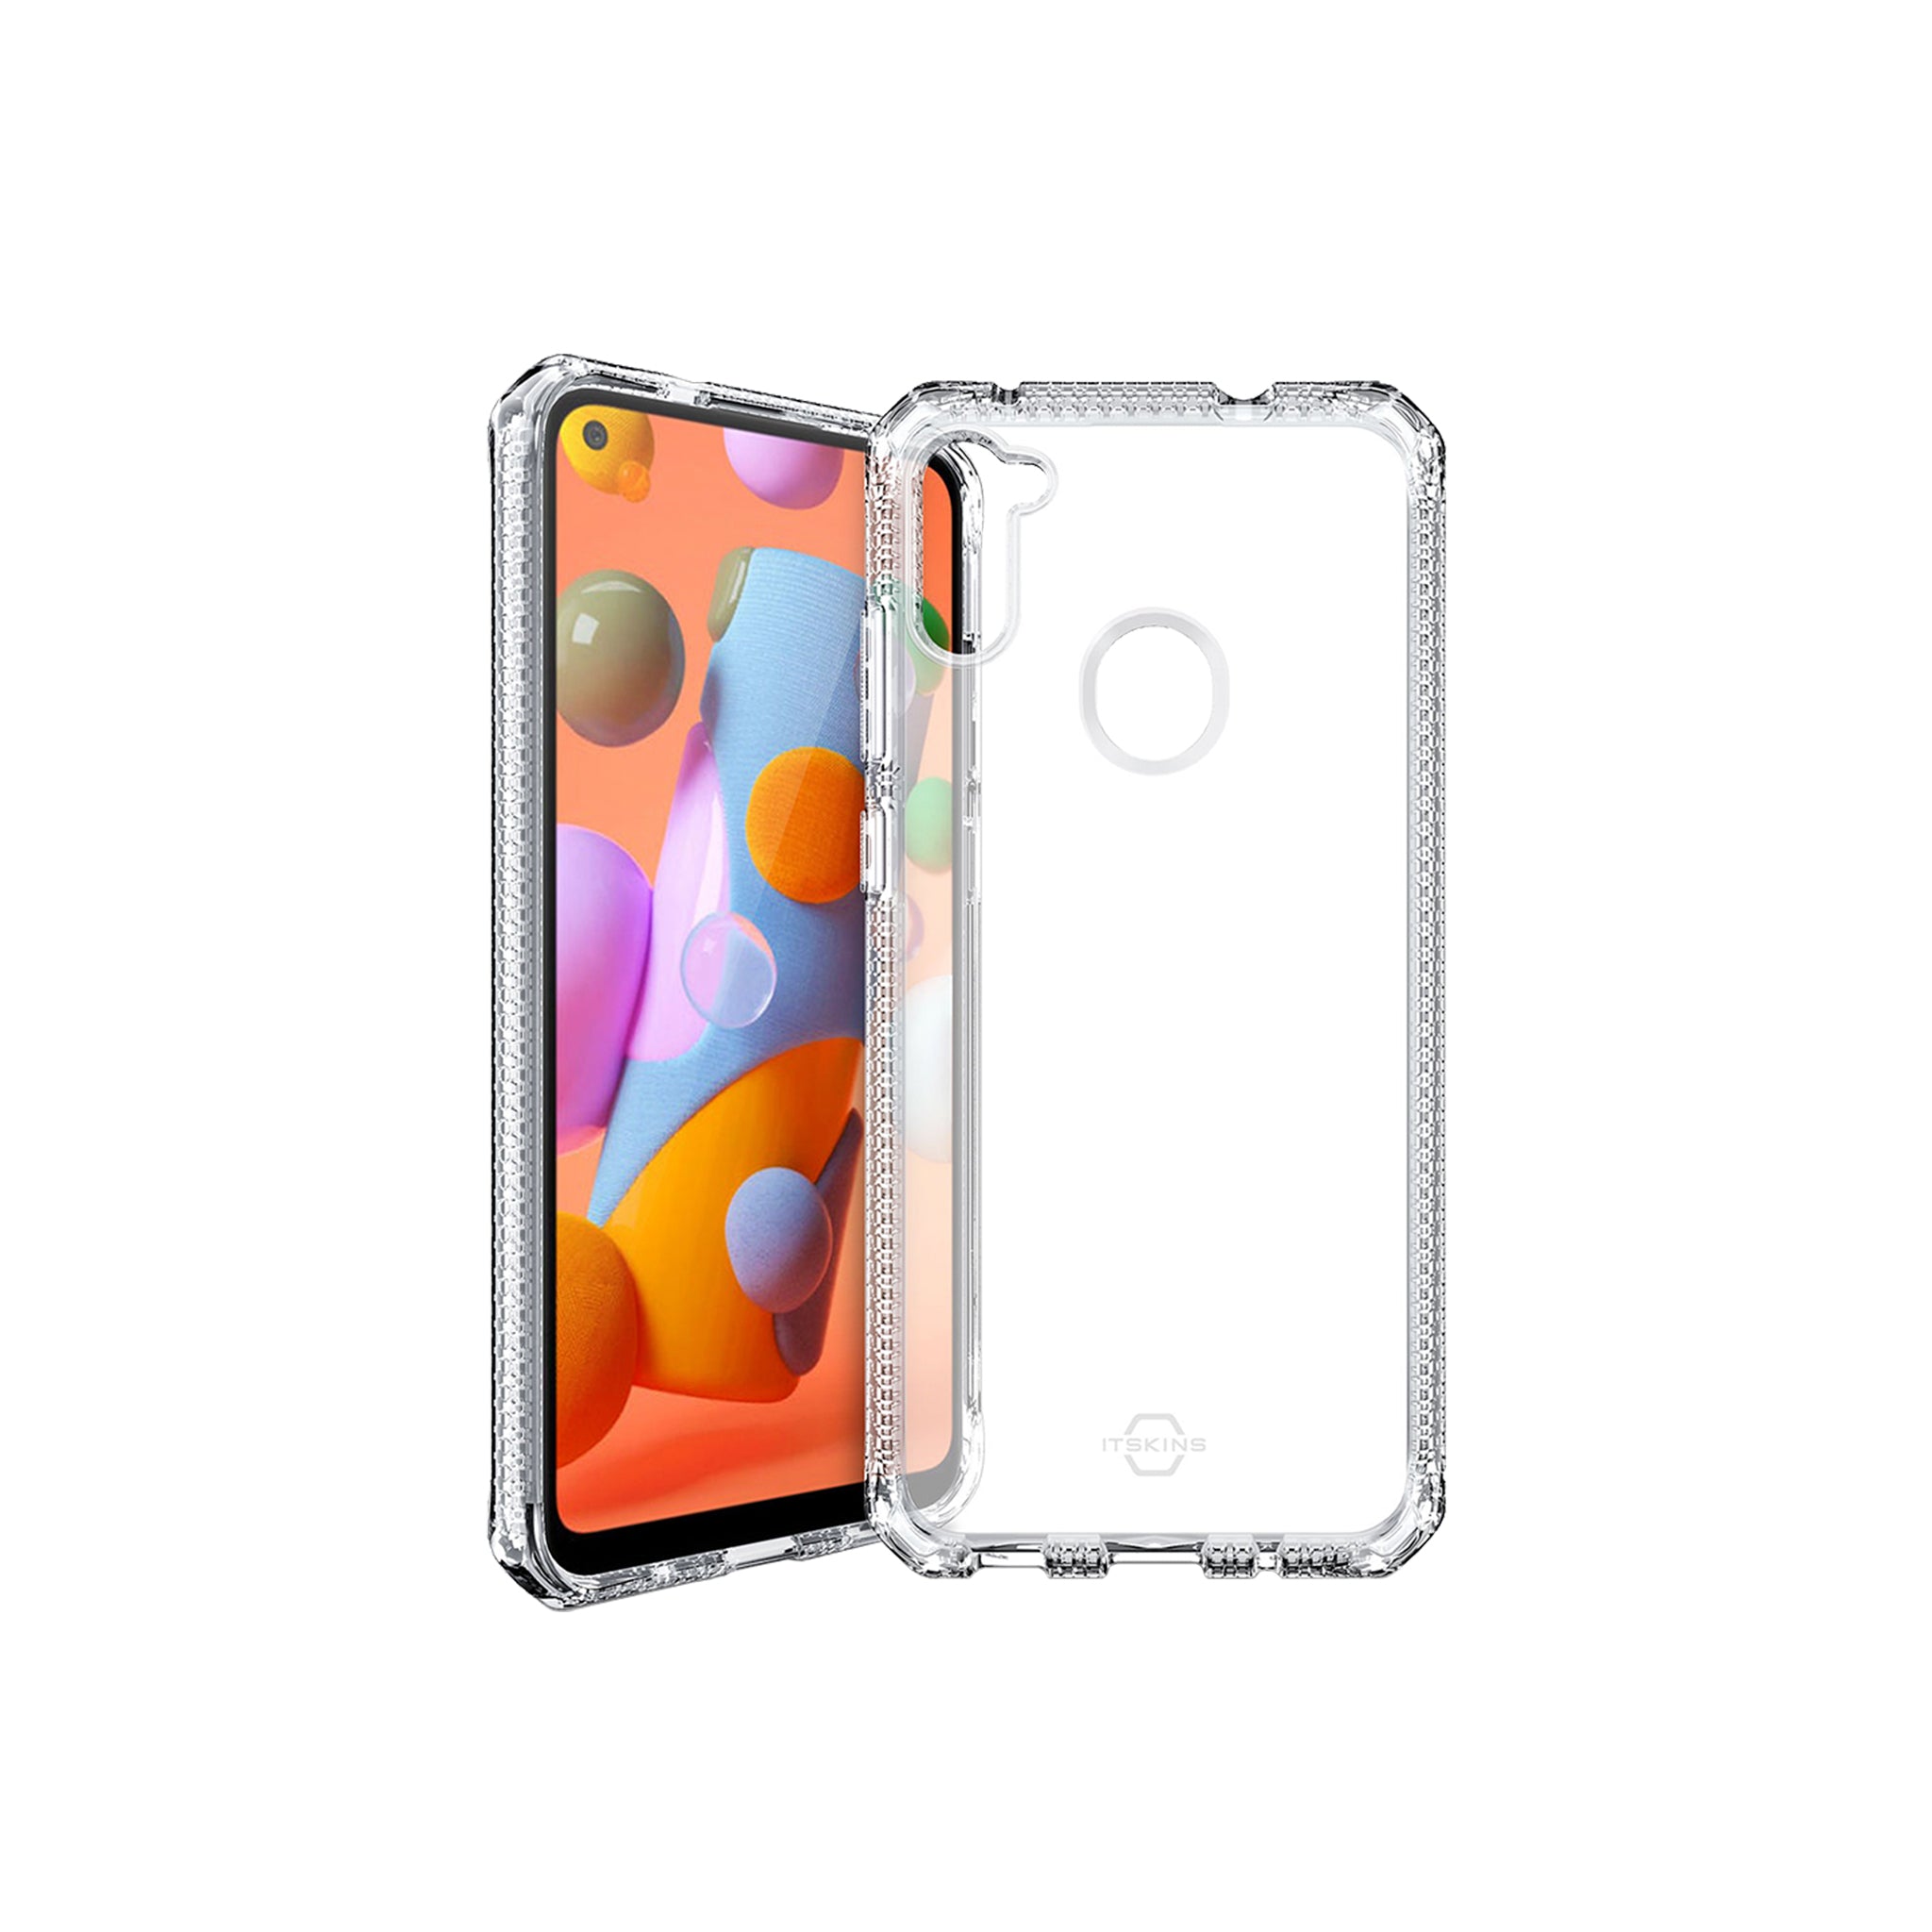 Itskins - Spectrum Clear Case For Samsung Galaxy A11 - Transparent